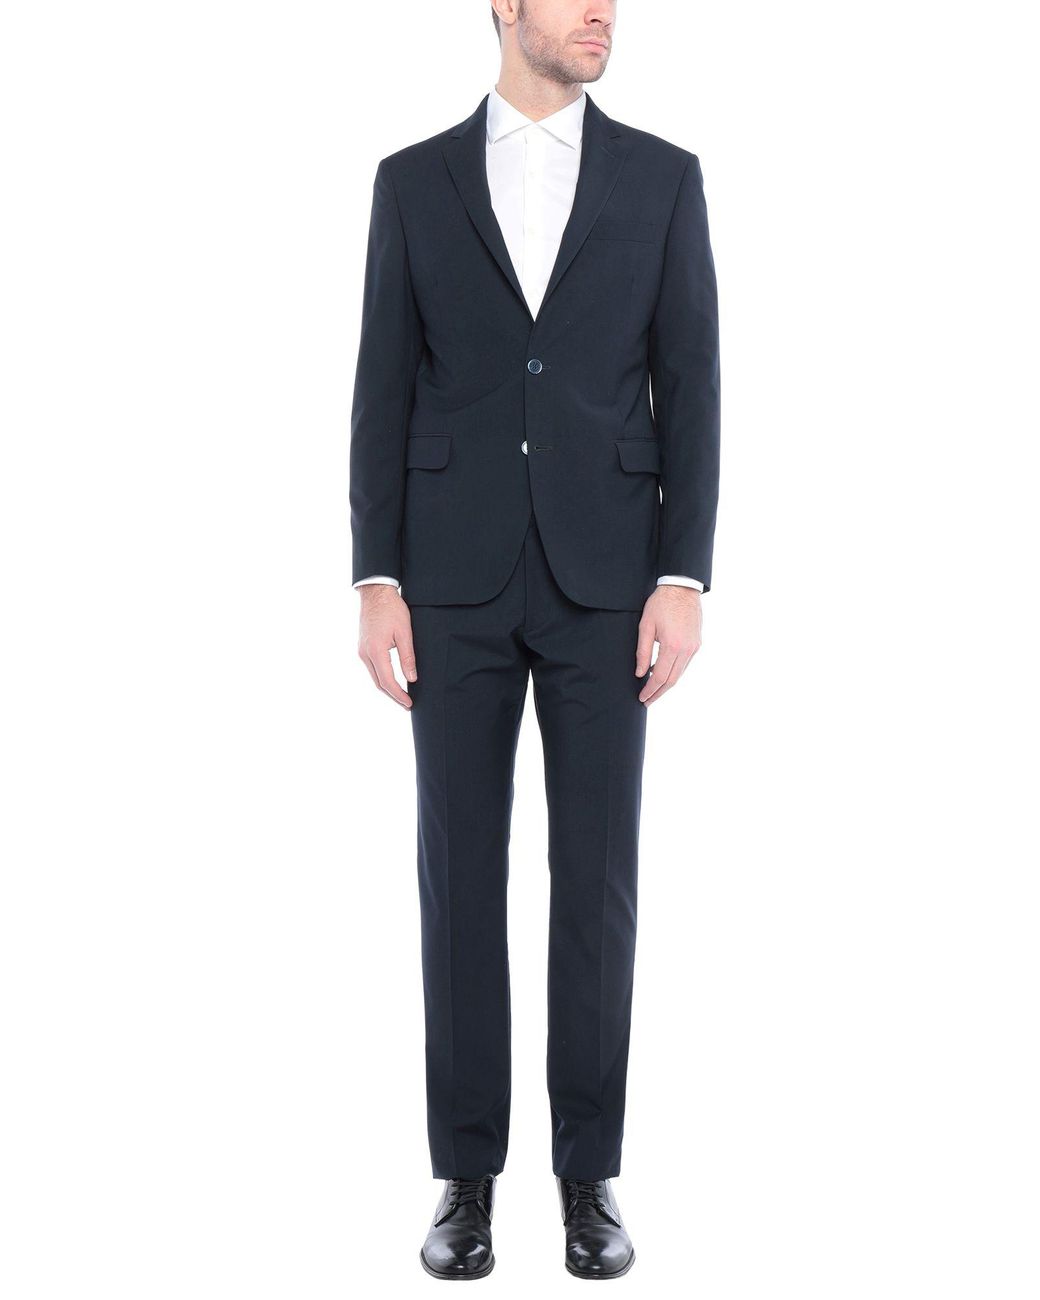 Guess Suit in Blue for Men - Lyst